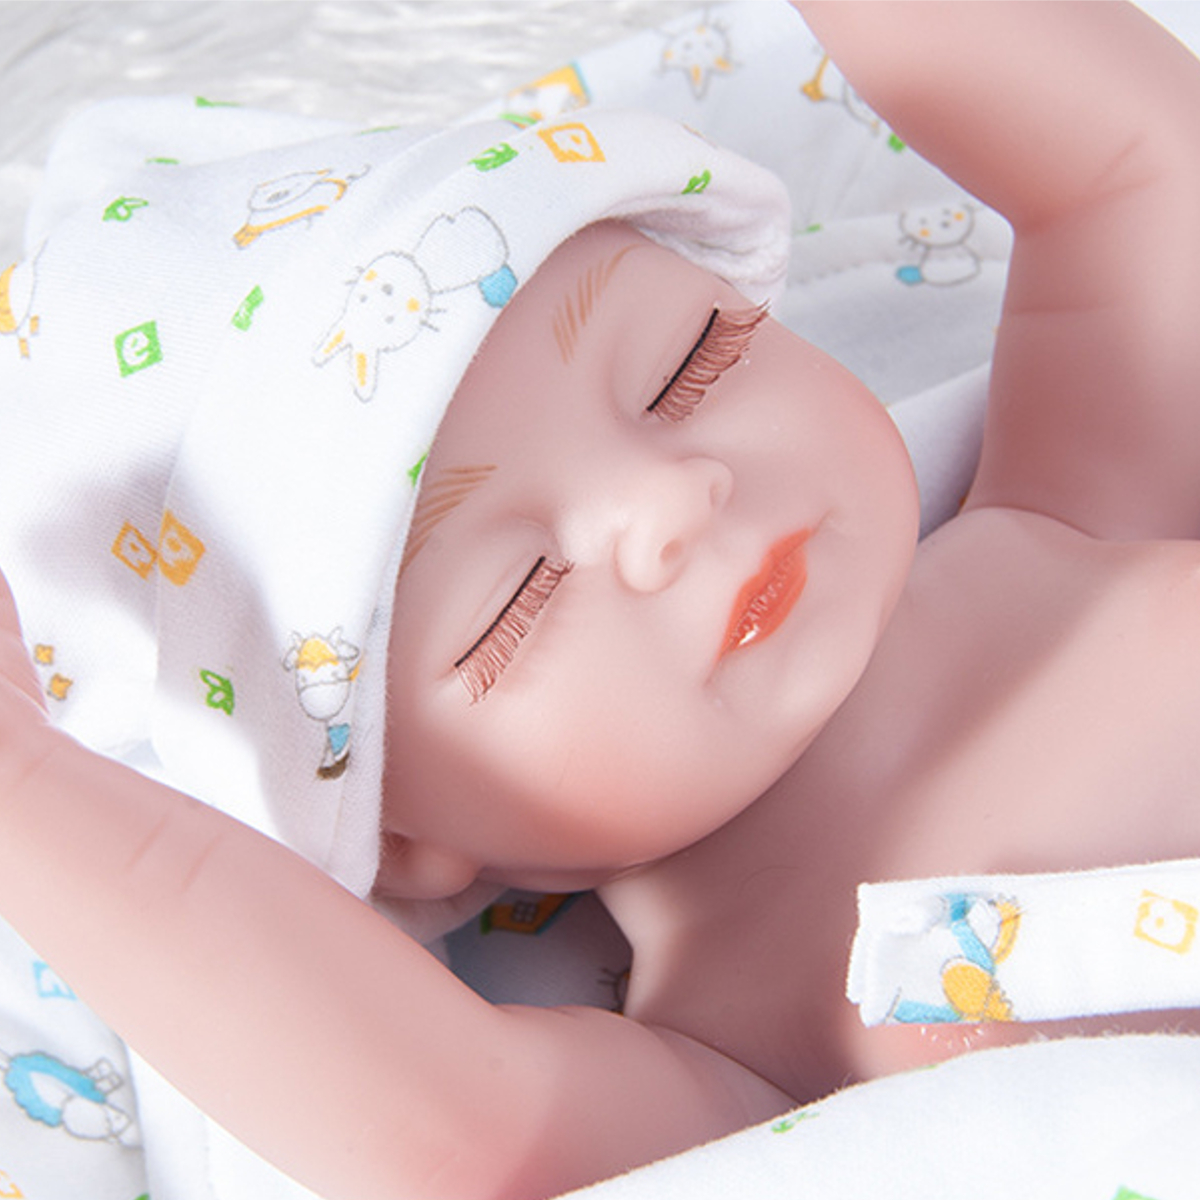 28CM-Soft-Silicone-Vinyl-Realistic-Sleeping-Reborn-Lifelike-Newborn-Baby-Doll-Toy-with-Moveable-Head-1731373-10